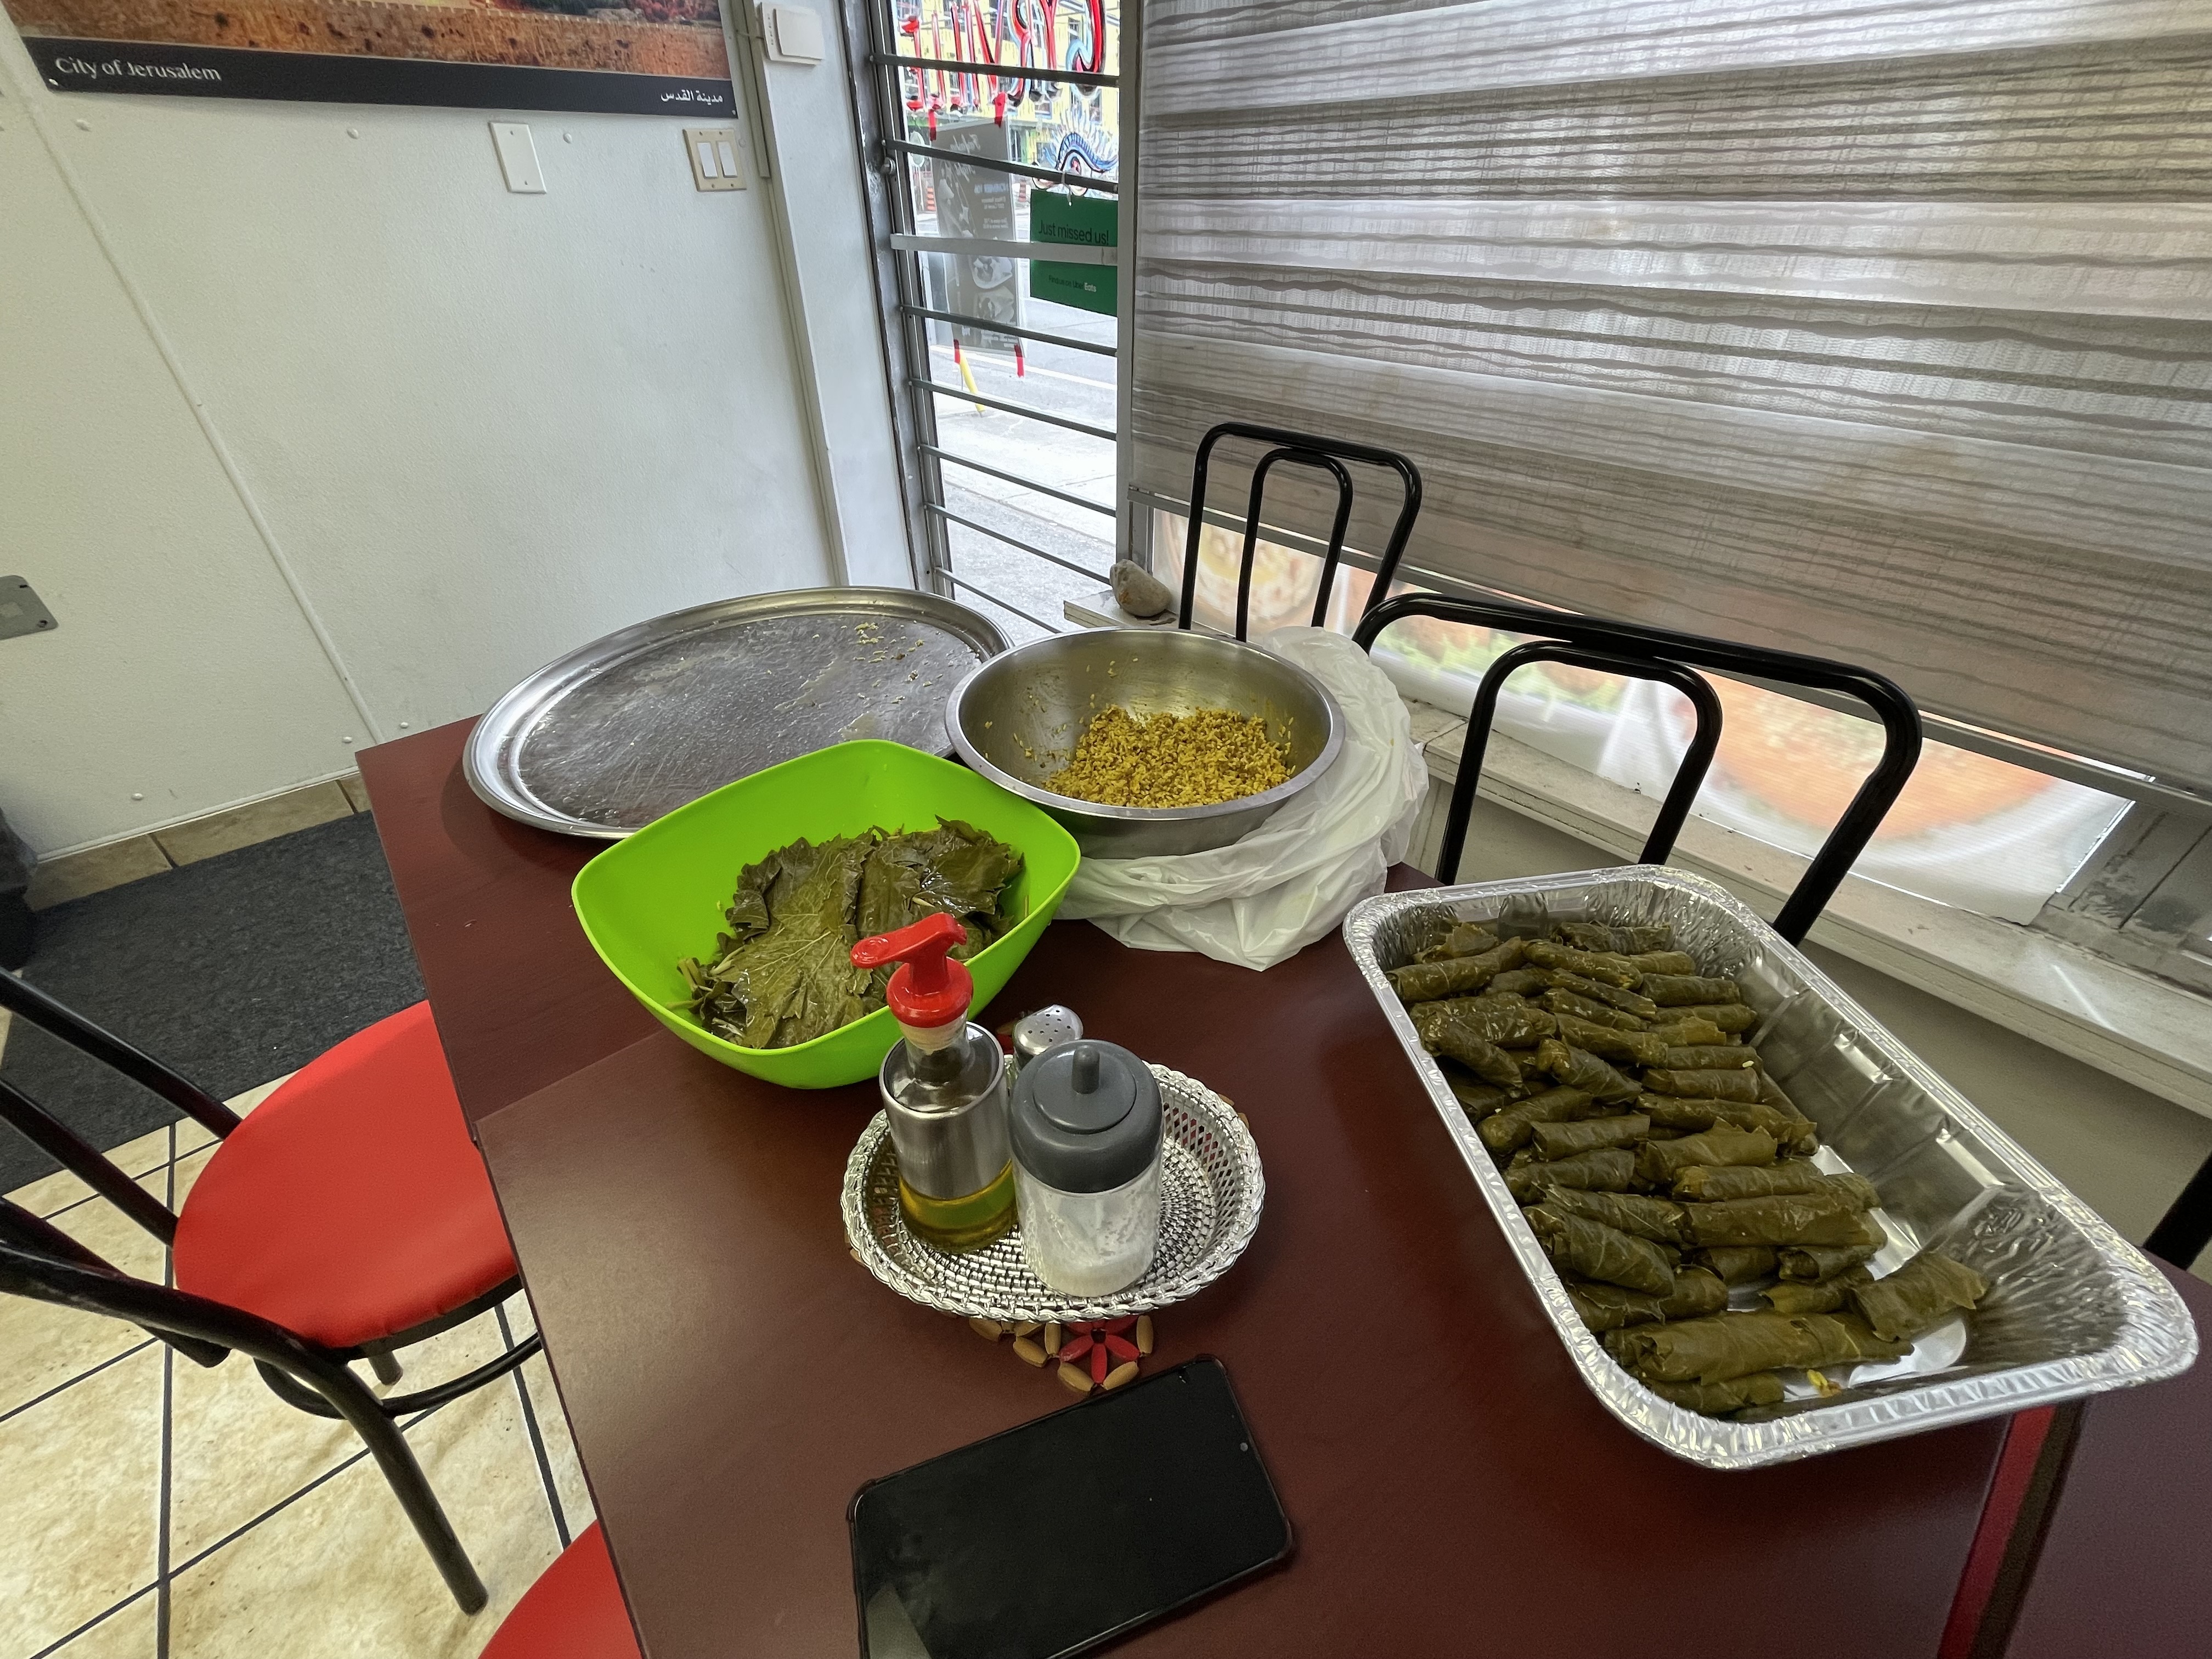 Ali's wife was busy preparing dawali, or Palestinian stuffed grape leaves, for a catering event